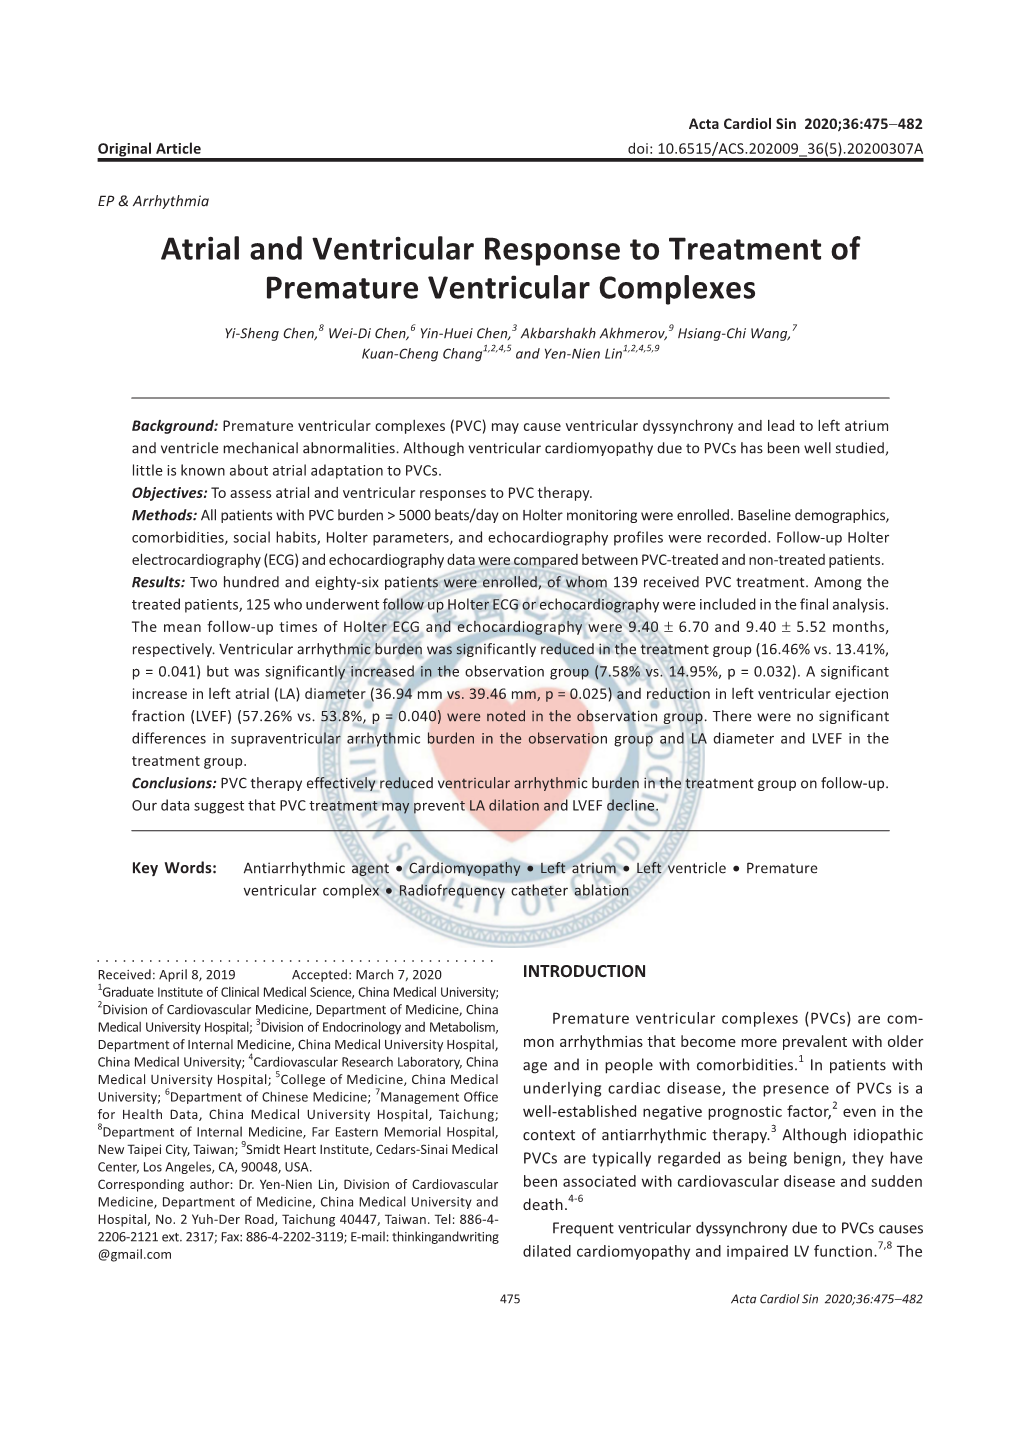 Atrial and Ventricular Response to Treatment of Premature Ventricular Complexes